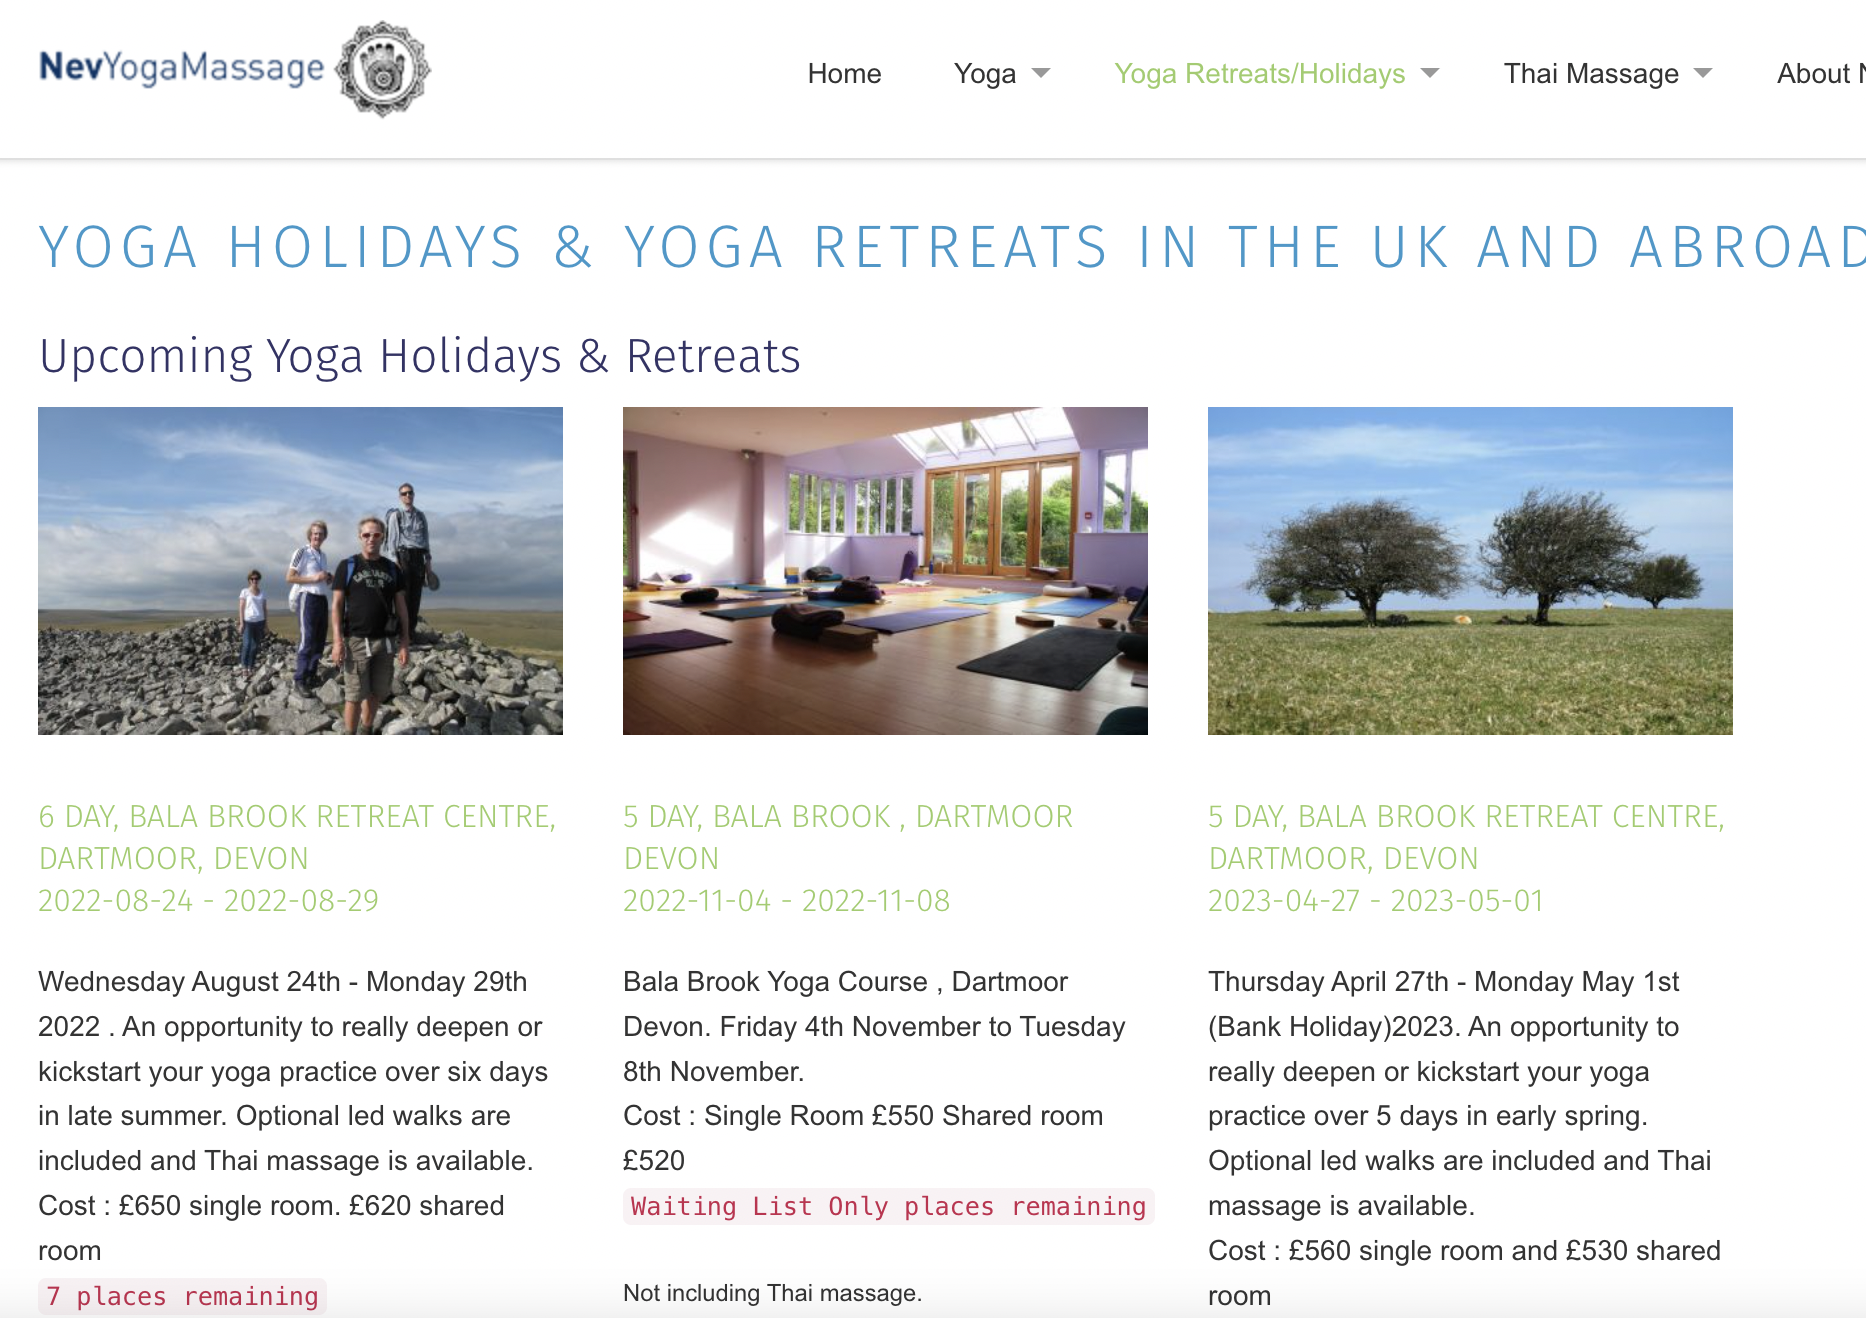 nev yoga how to sell a yoga retreat image